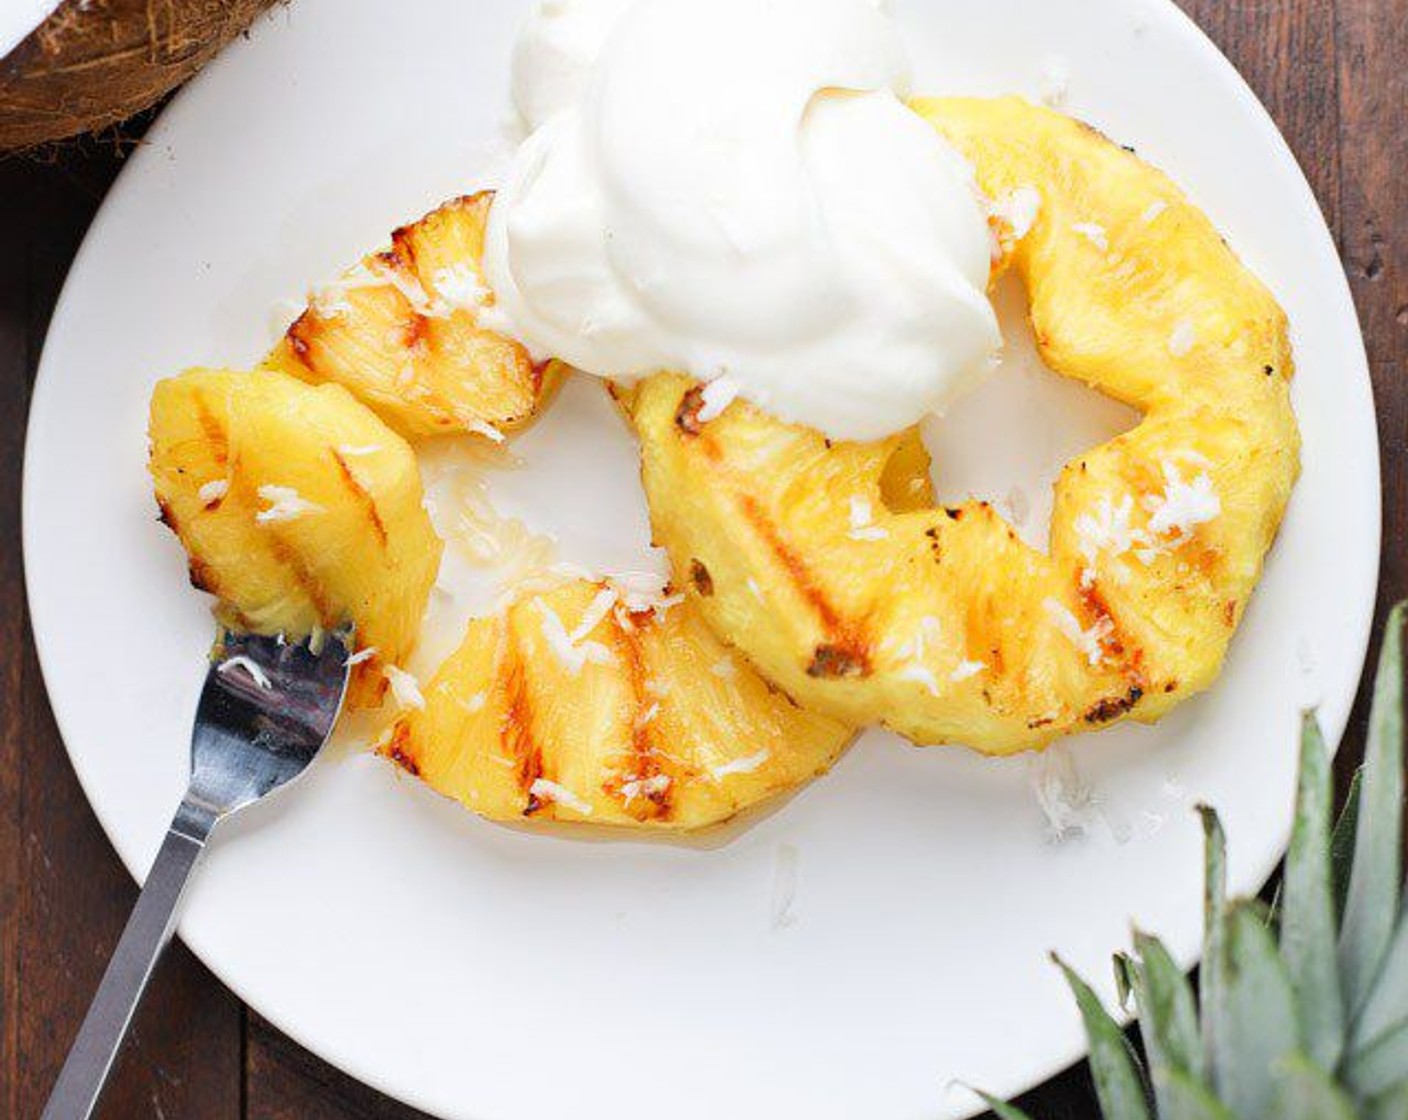 step 8 Top pineapple with the rum-infused whipped topping. Sprinkle with Sweetened Shredded Coconut (1/4 cup).